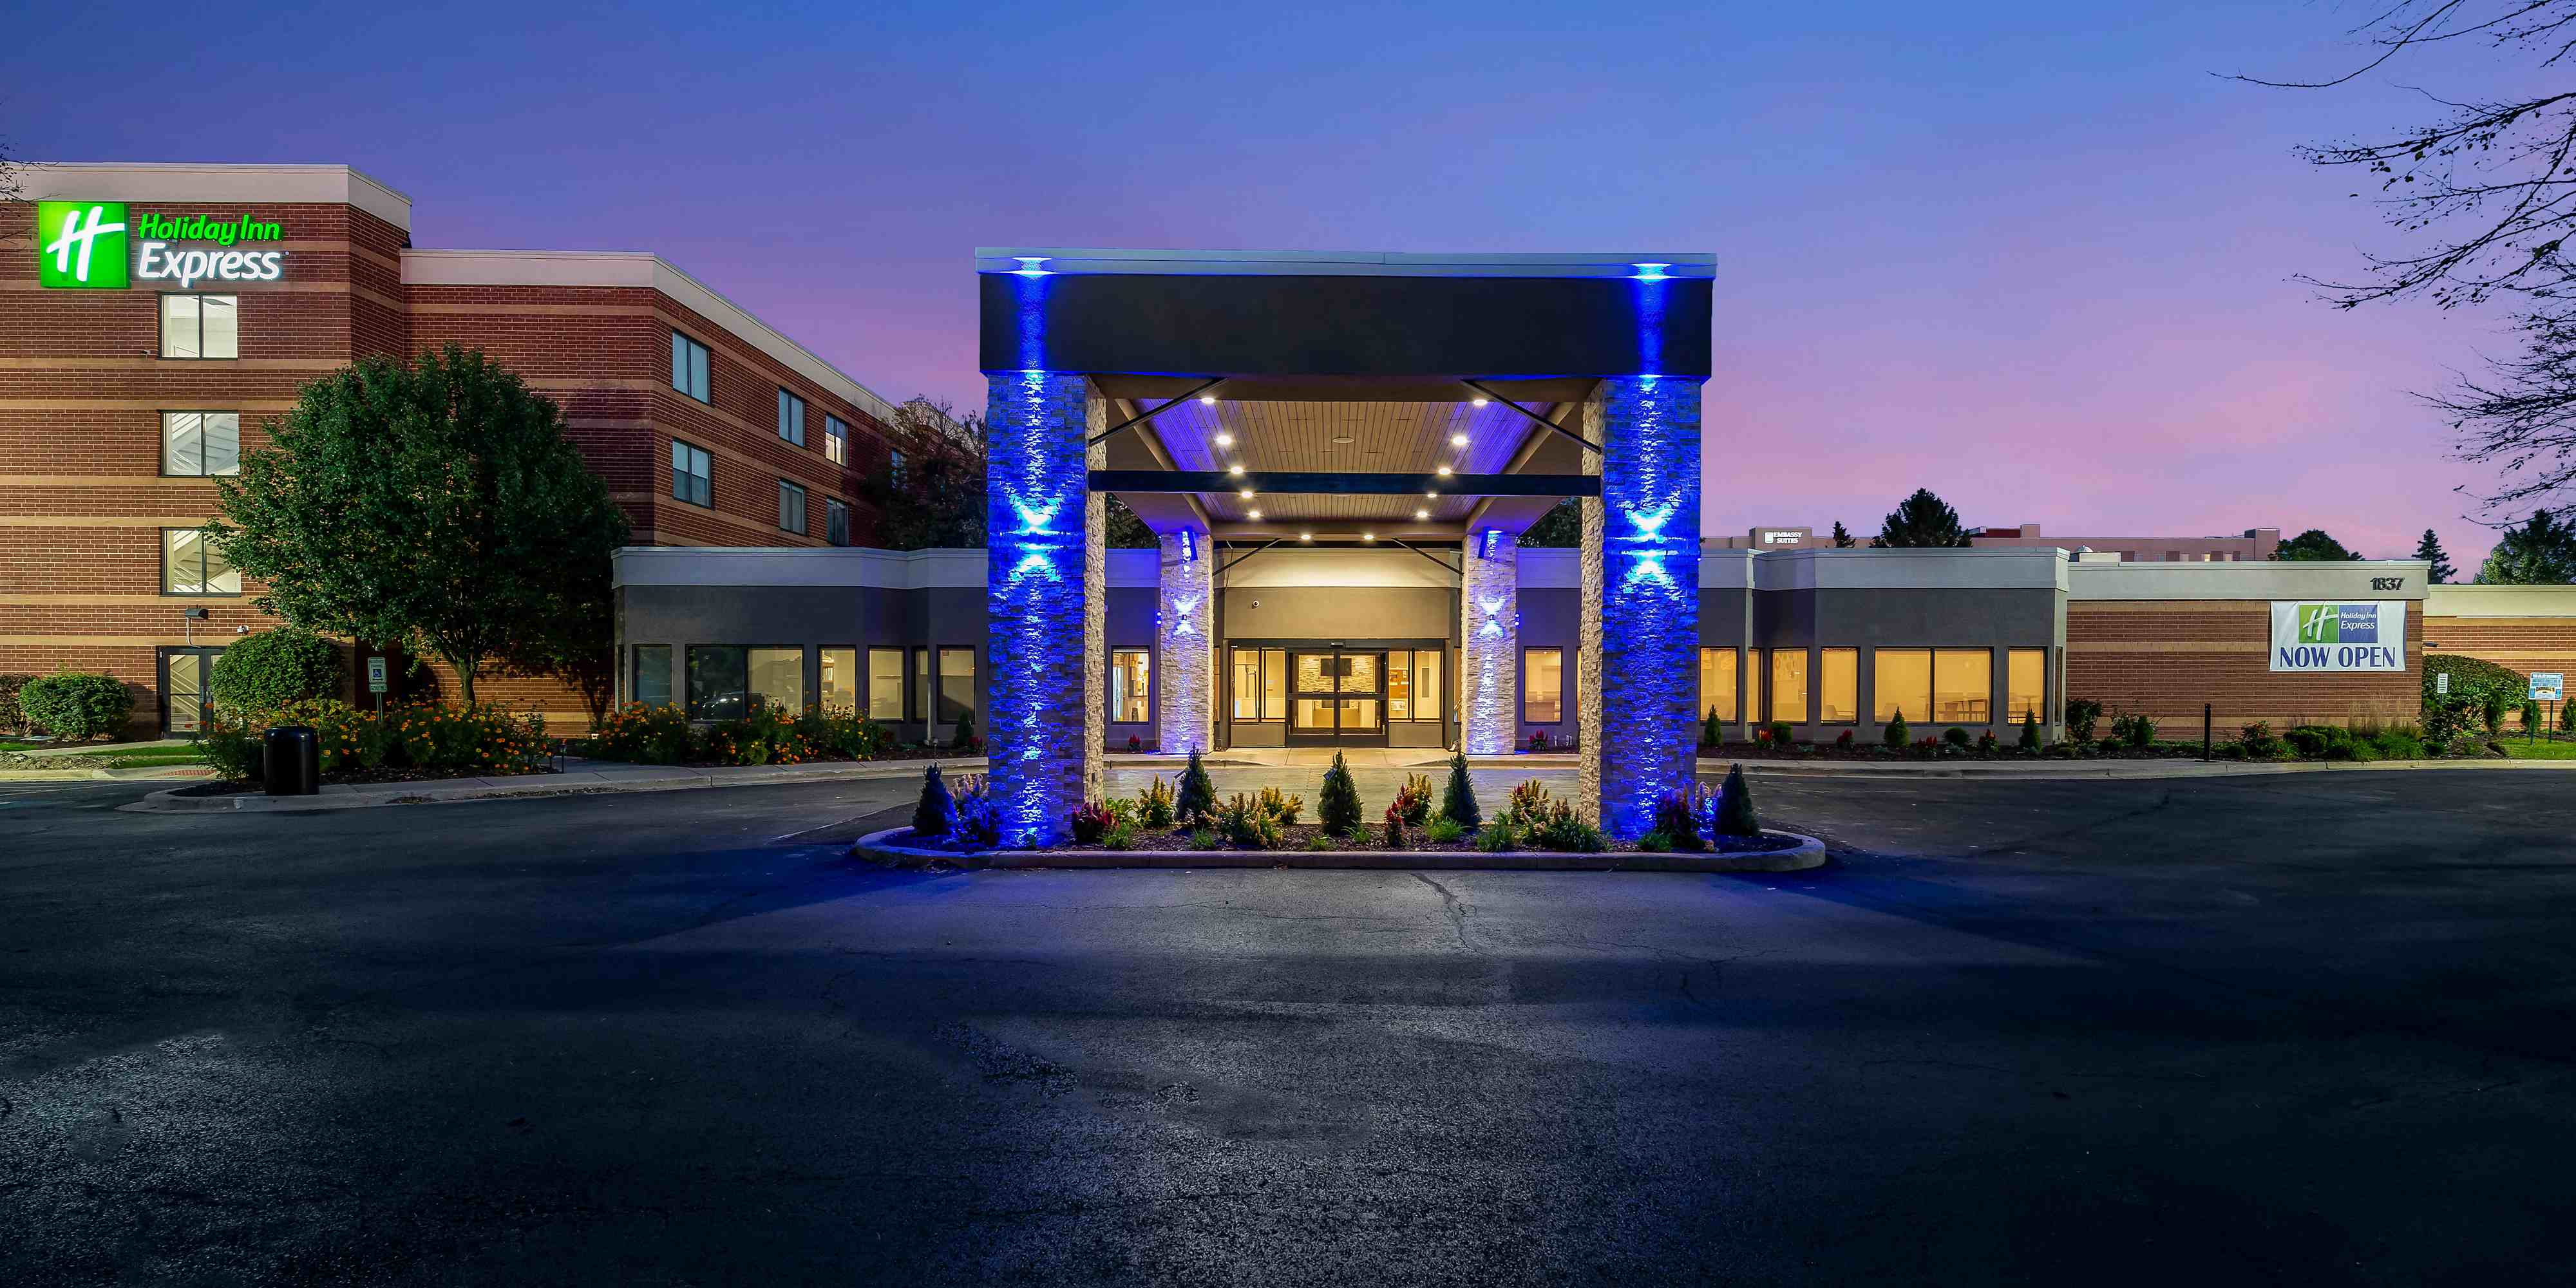 Holiday Inn Express Naperville - Naperville, United States